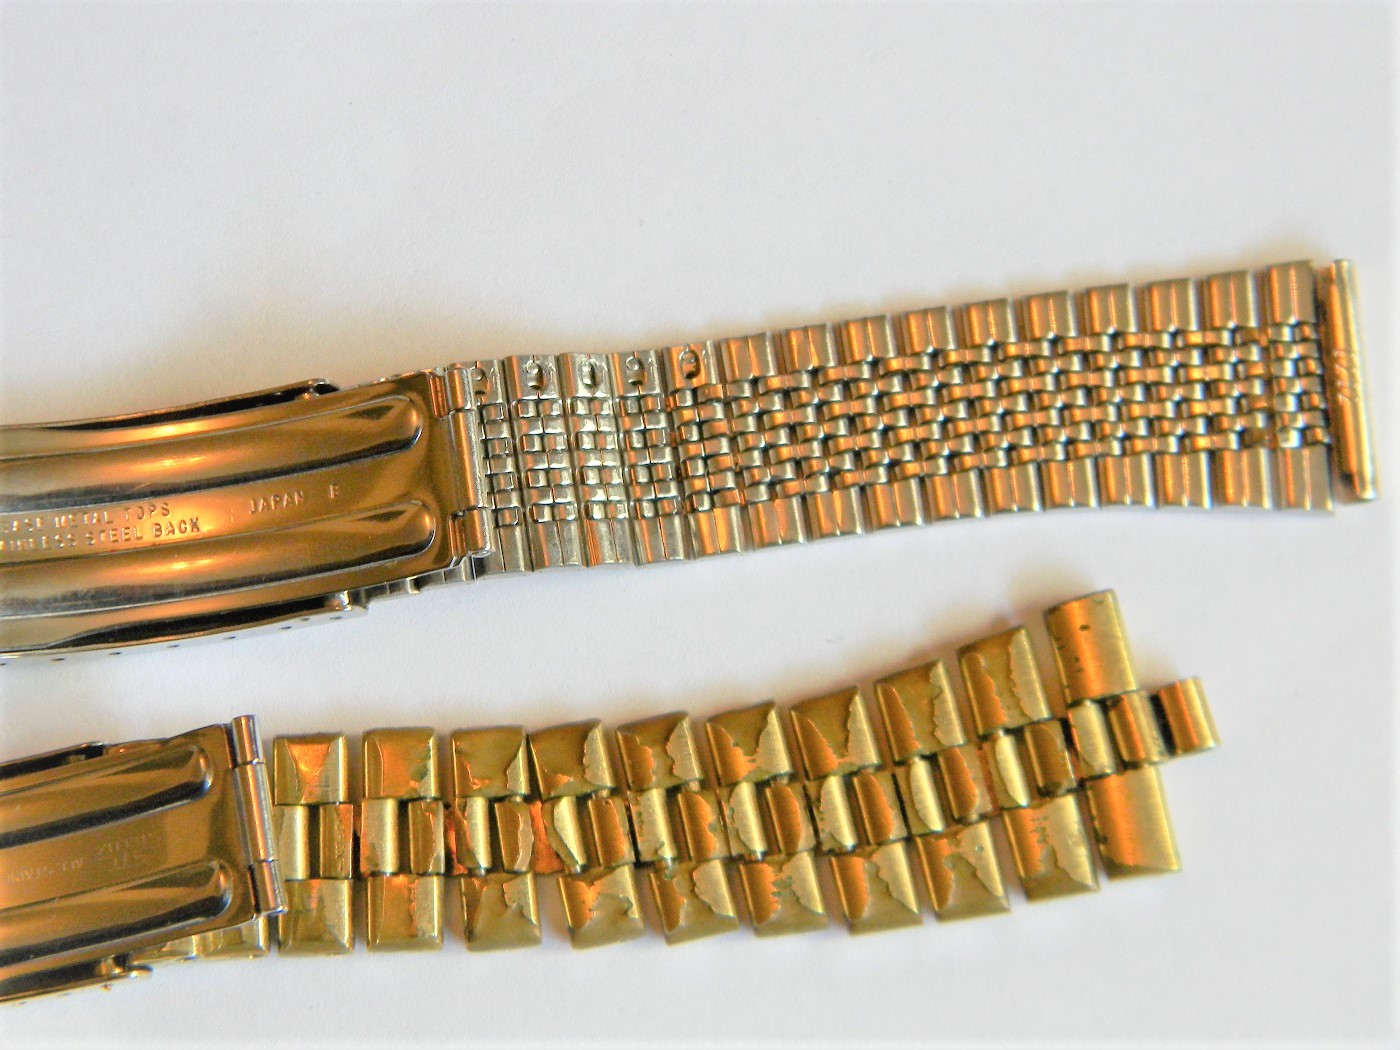 Paul's Pens & Watches: SEIKO Bracelets 10 Metal Bands Steel And Gold ...